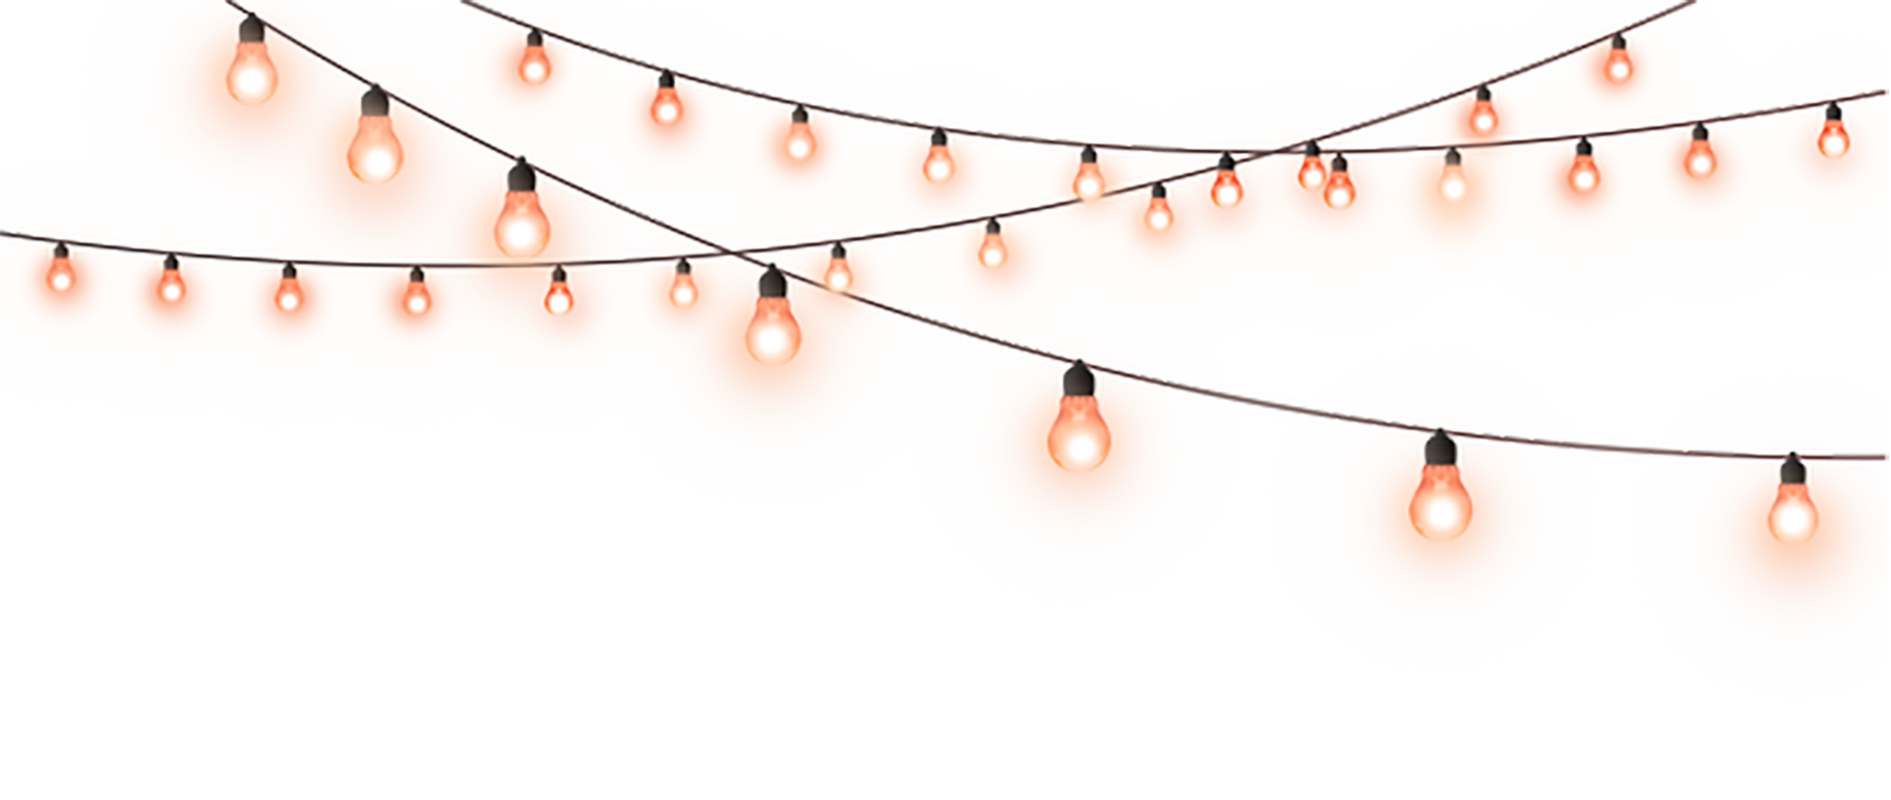 Decorative Light Lamp String PNG Free Photo Clipart